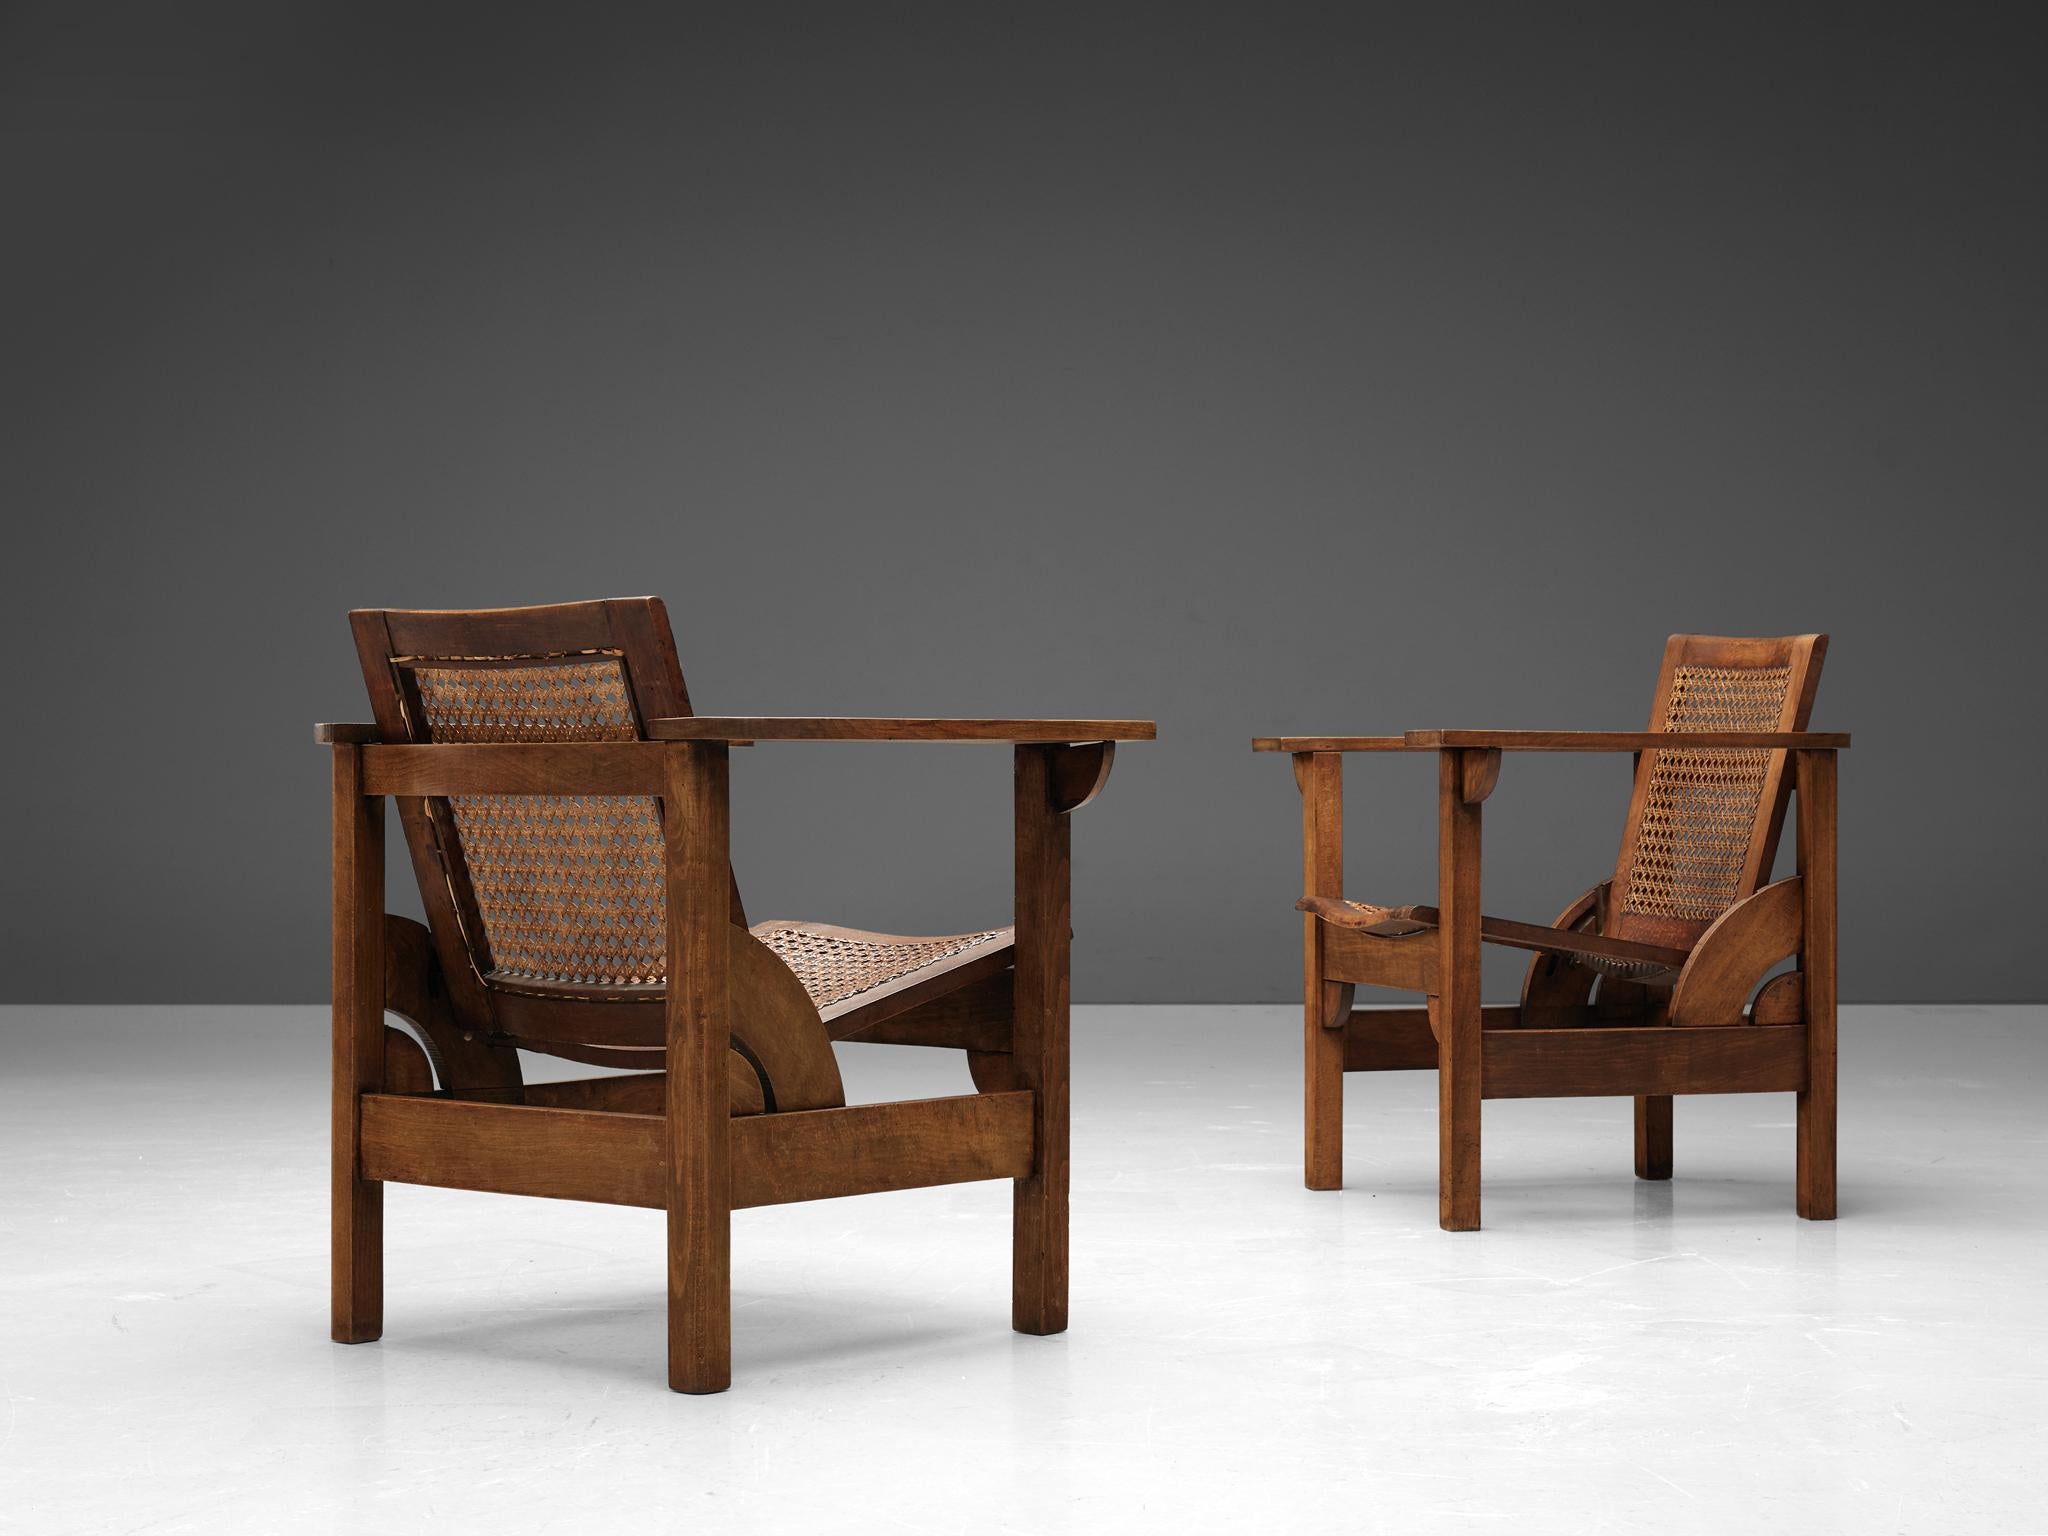 Pierre Dariel, 'Hendaye' armchairs, beech, cane, France, 1930s. 

Sturdy Hendaye model lounge chair designed by Pierre Dariel in the 1930s. The wooden framework is executed in beech, whereas the seat and backrest are made of cane. Unique to this